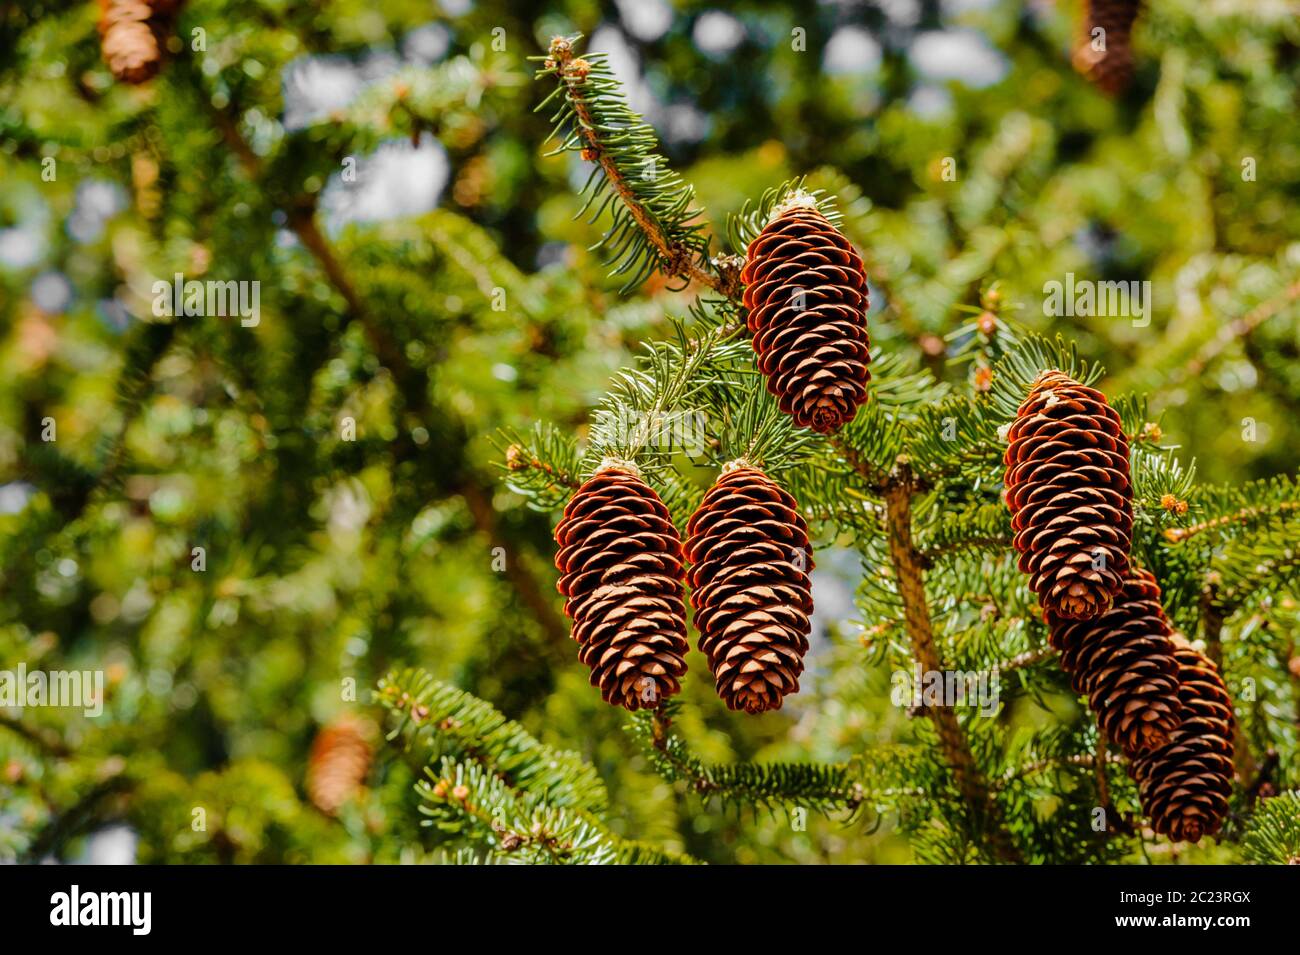 Cluster of conifer cones hanging off tree branch. Stock Photo